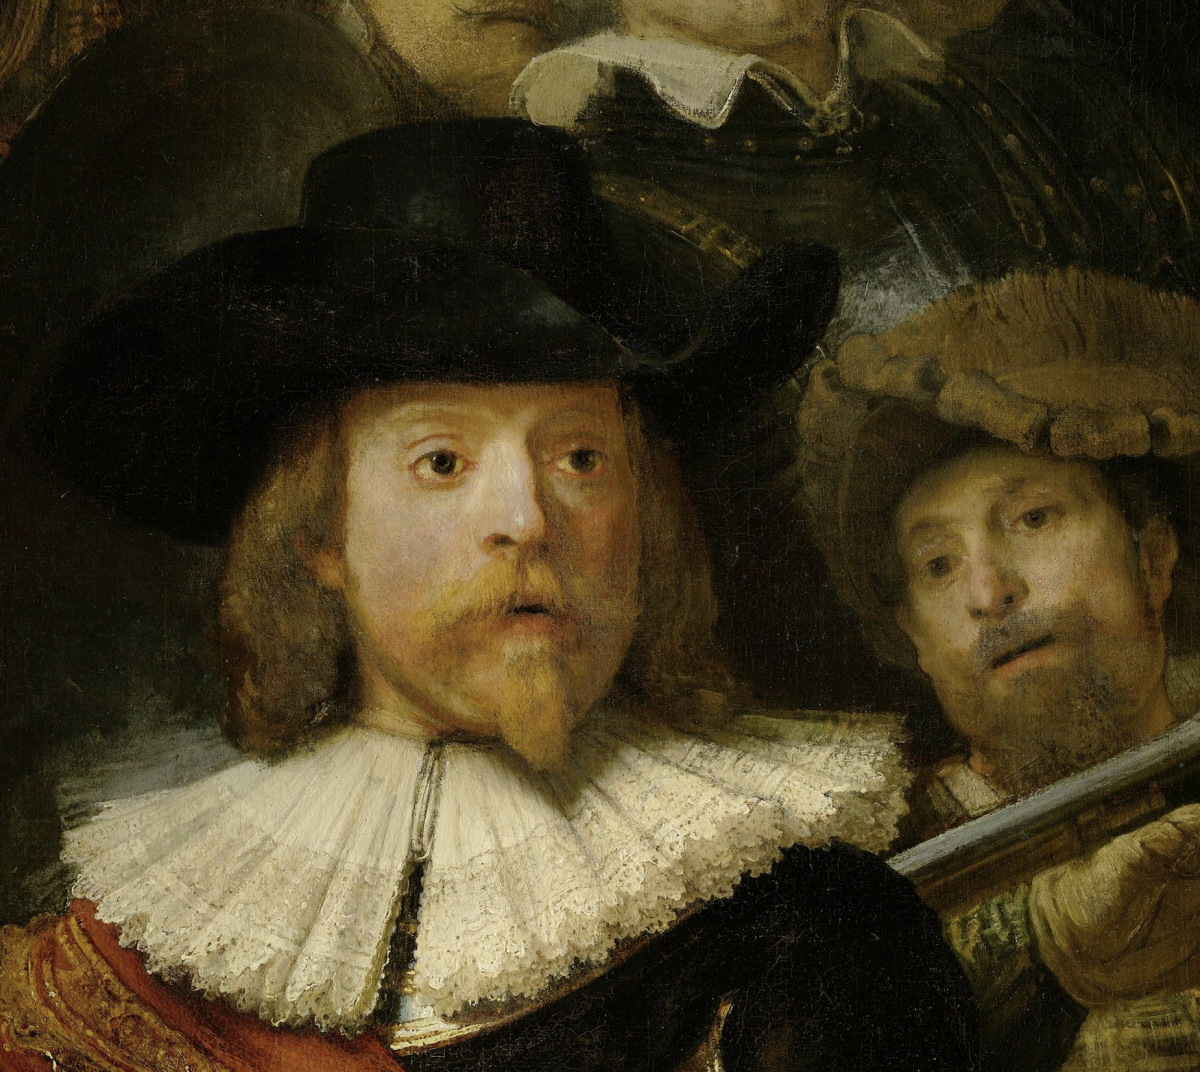  Rembrandt's «The Night Watch»: A Masterpiece of Baroque Art